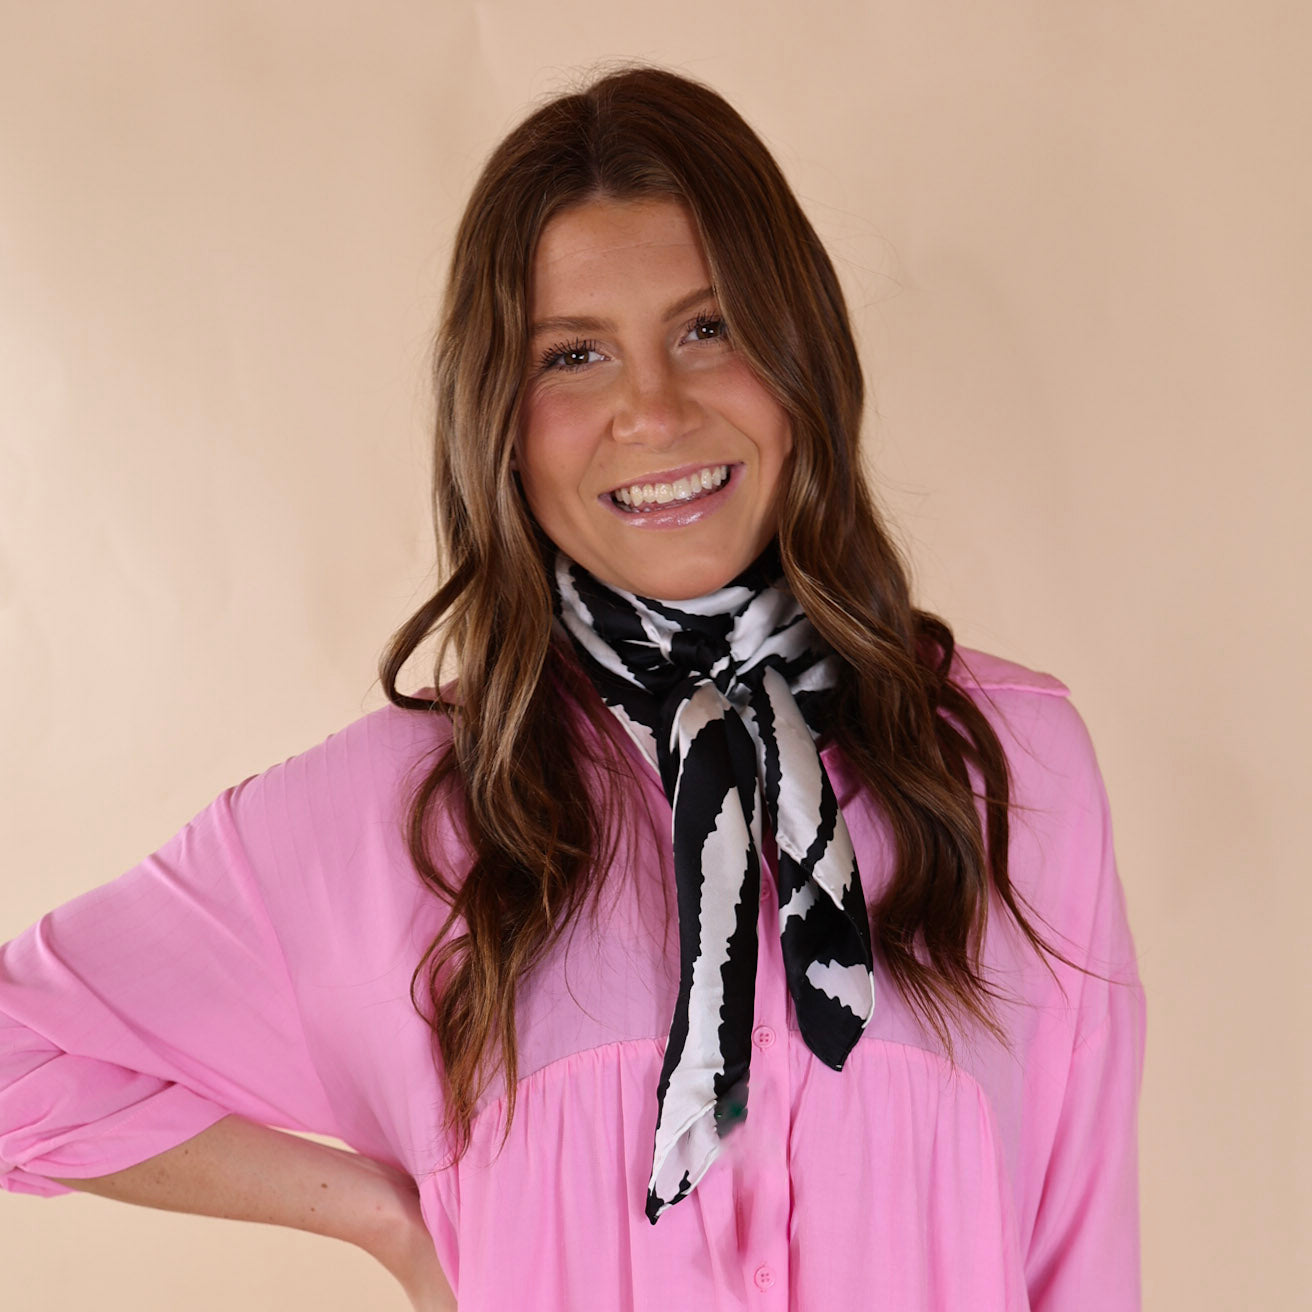 Brunette model wearing a pink, button up top with a black and white zebra print scarf tied around her neck. Model is pictured in front of a beige background. 